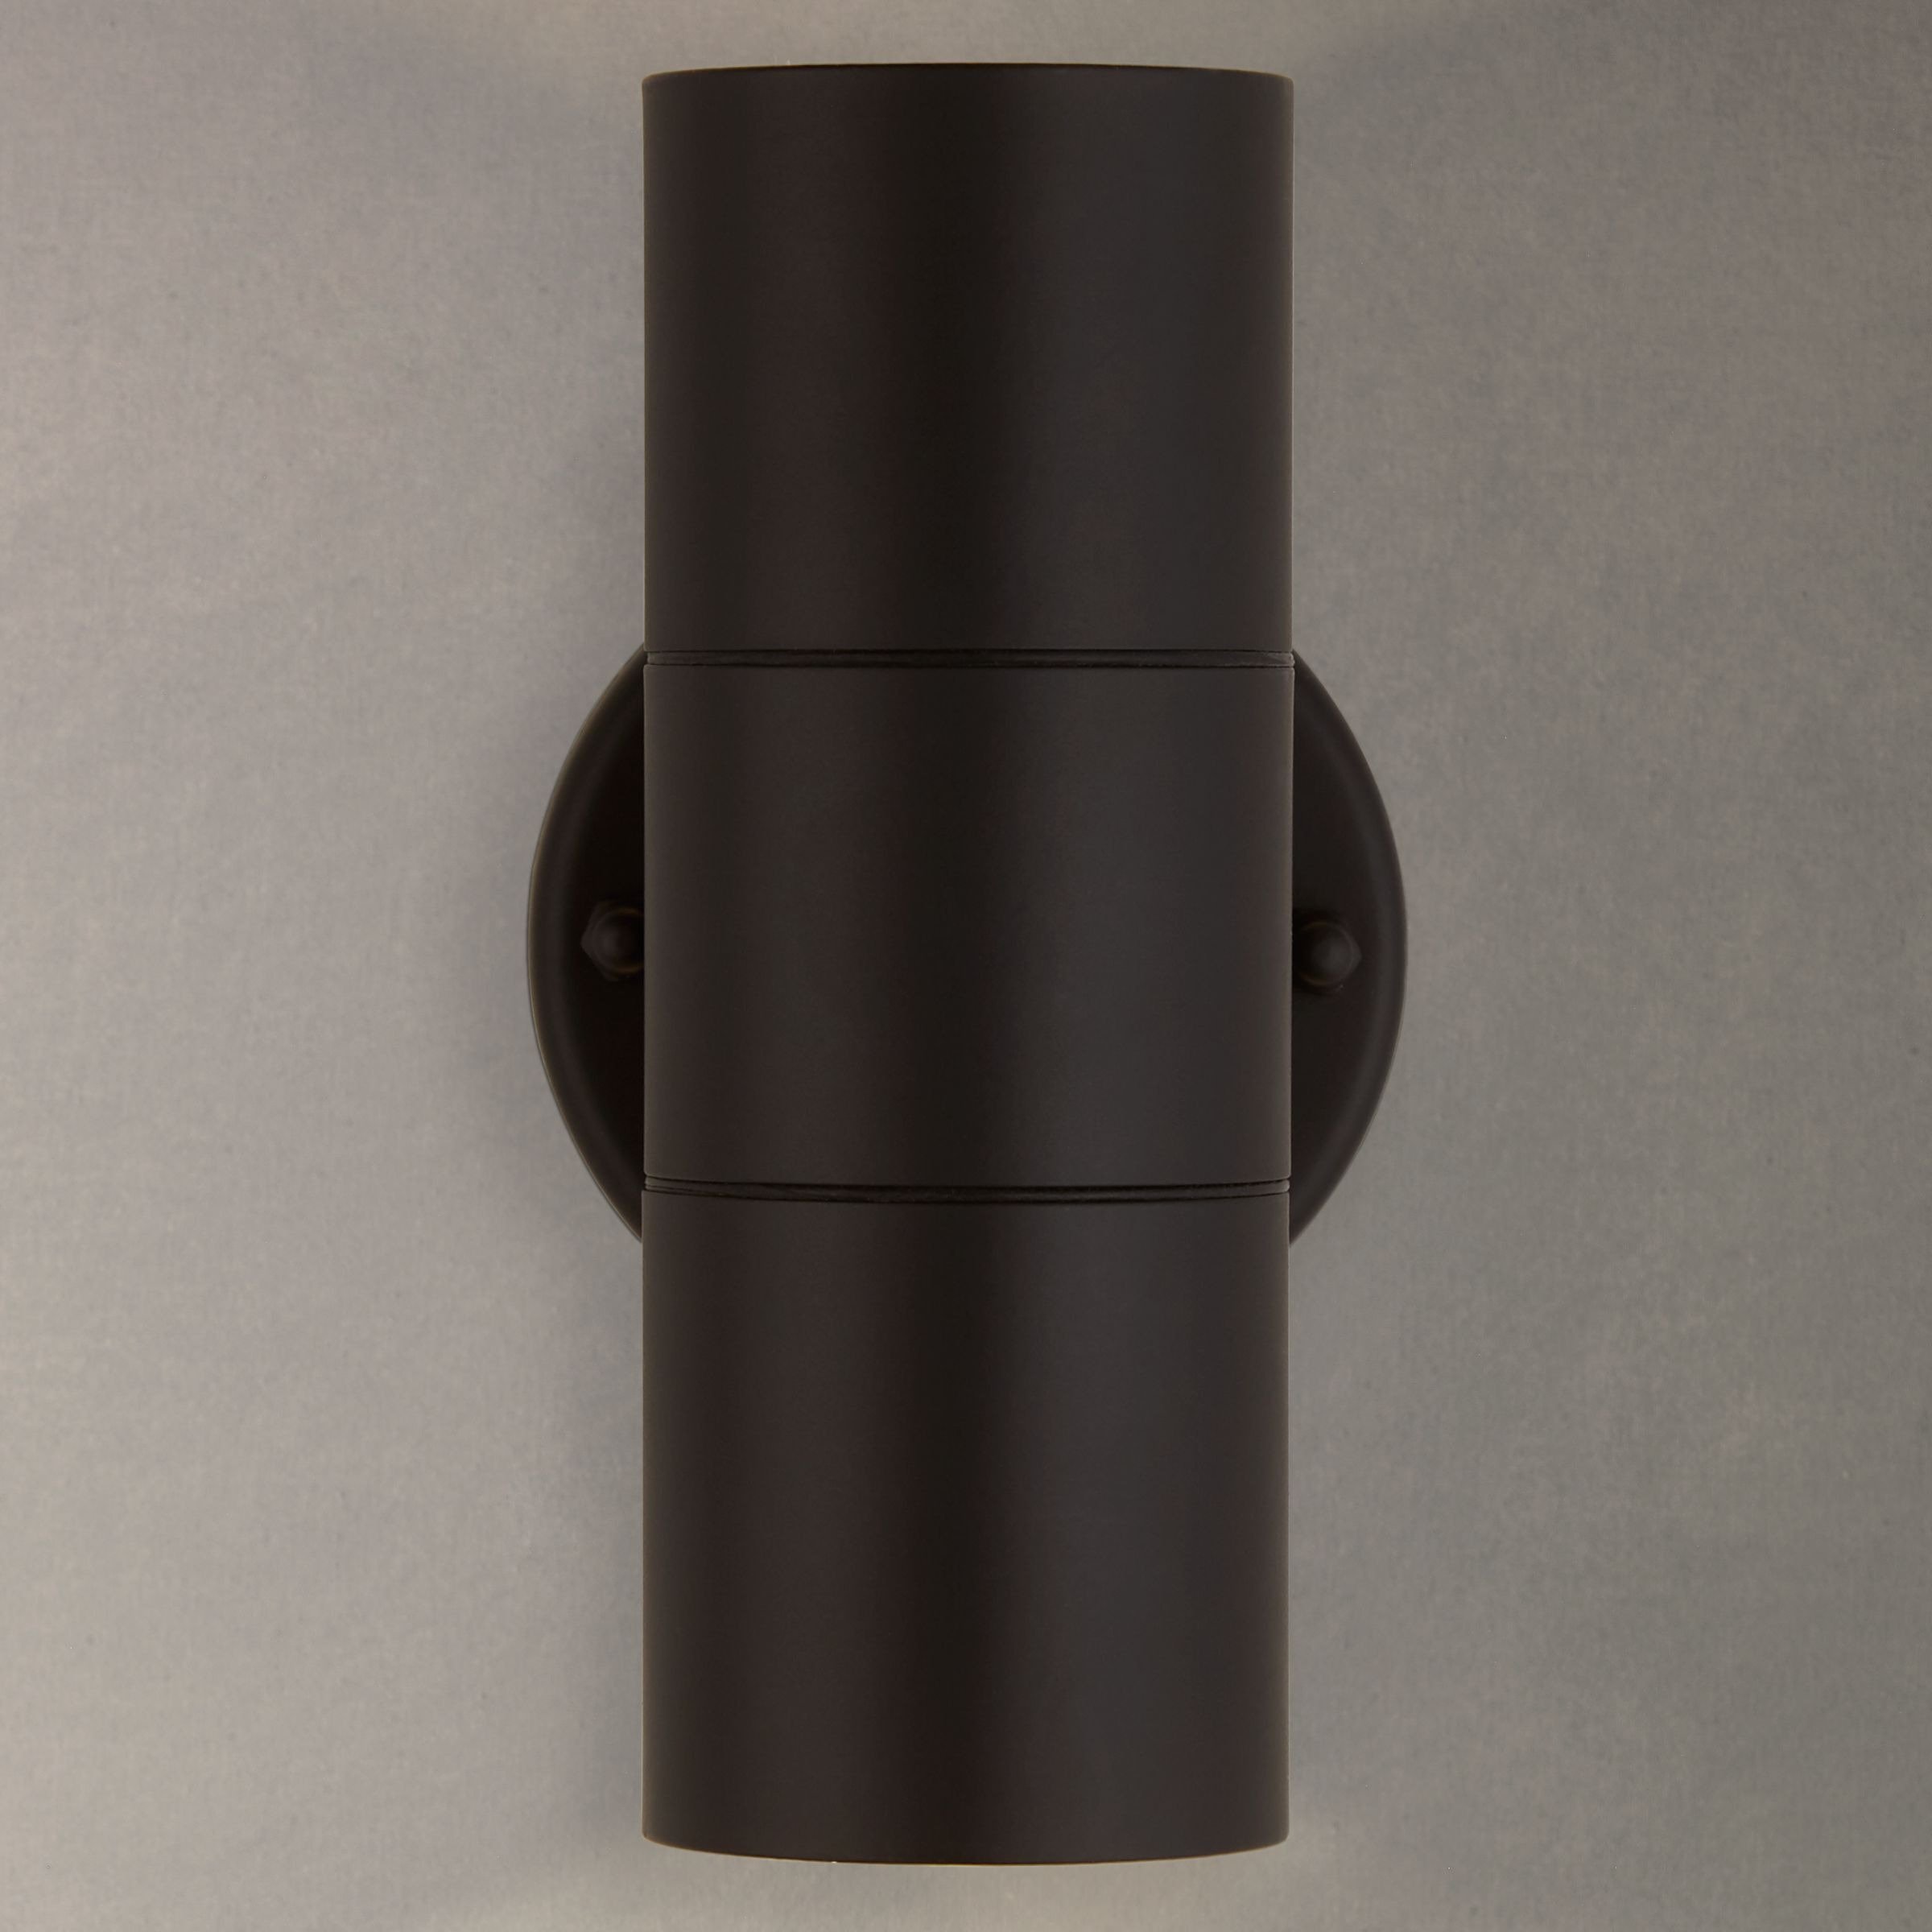 John Lewis Strom LED Outdoor Wall Light - image 1